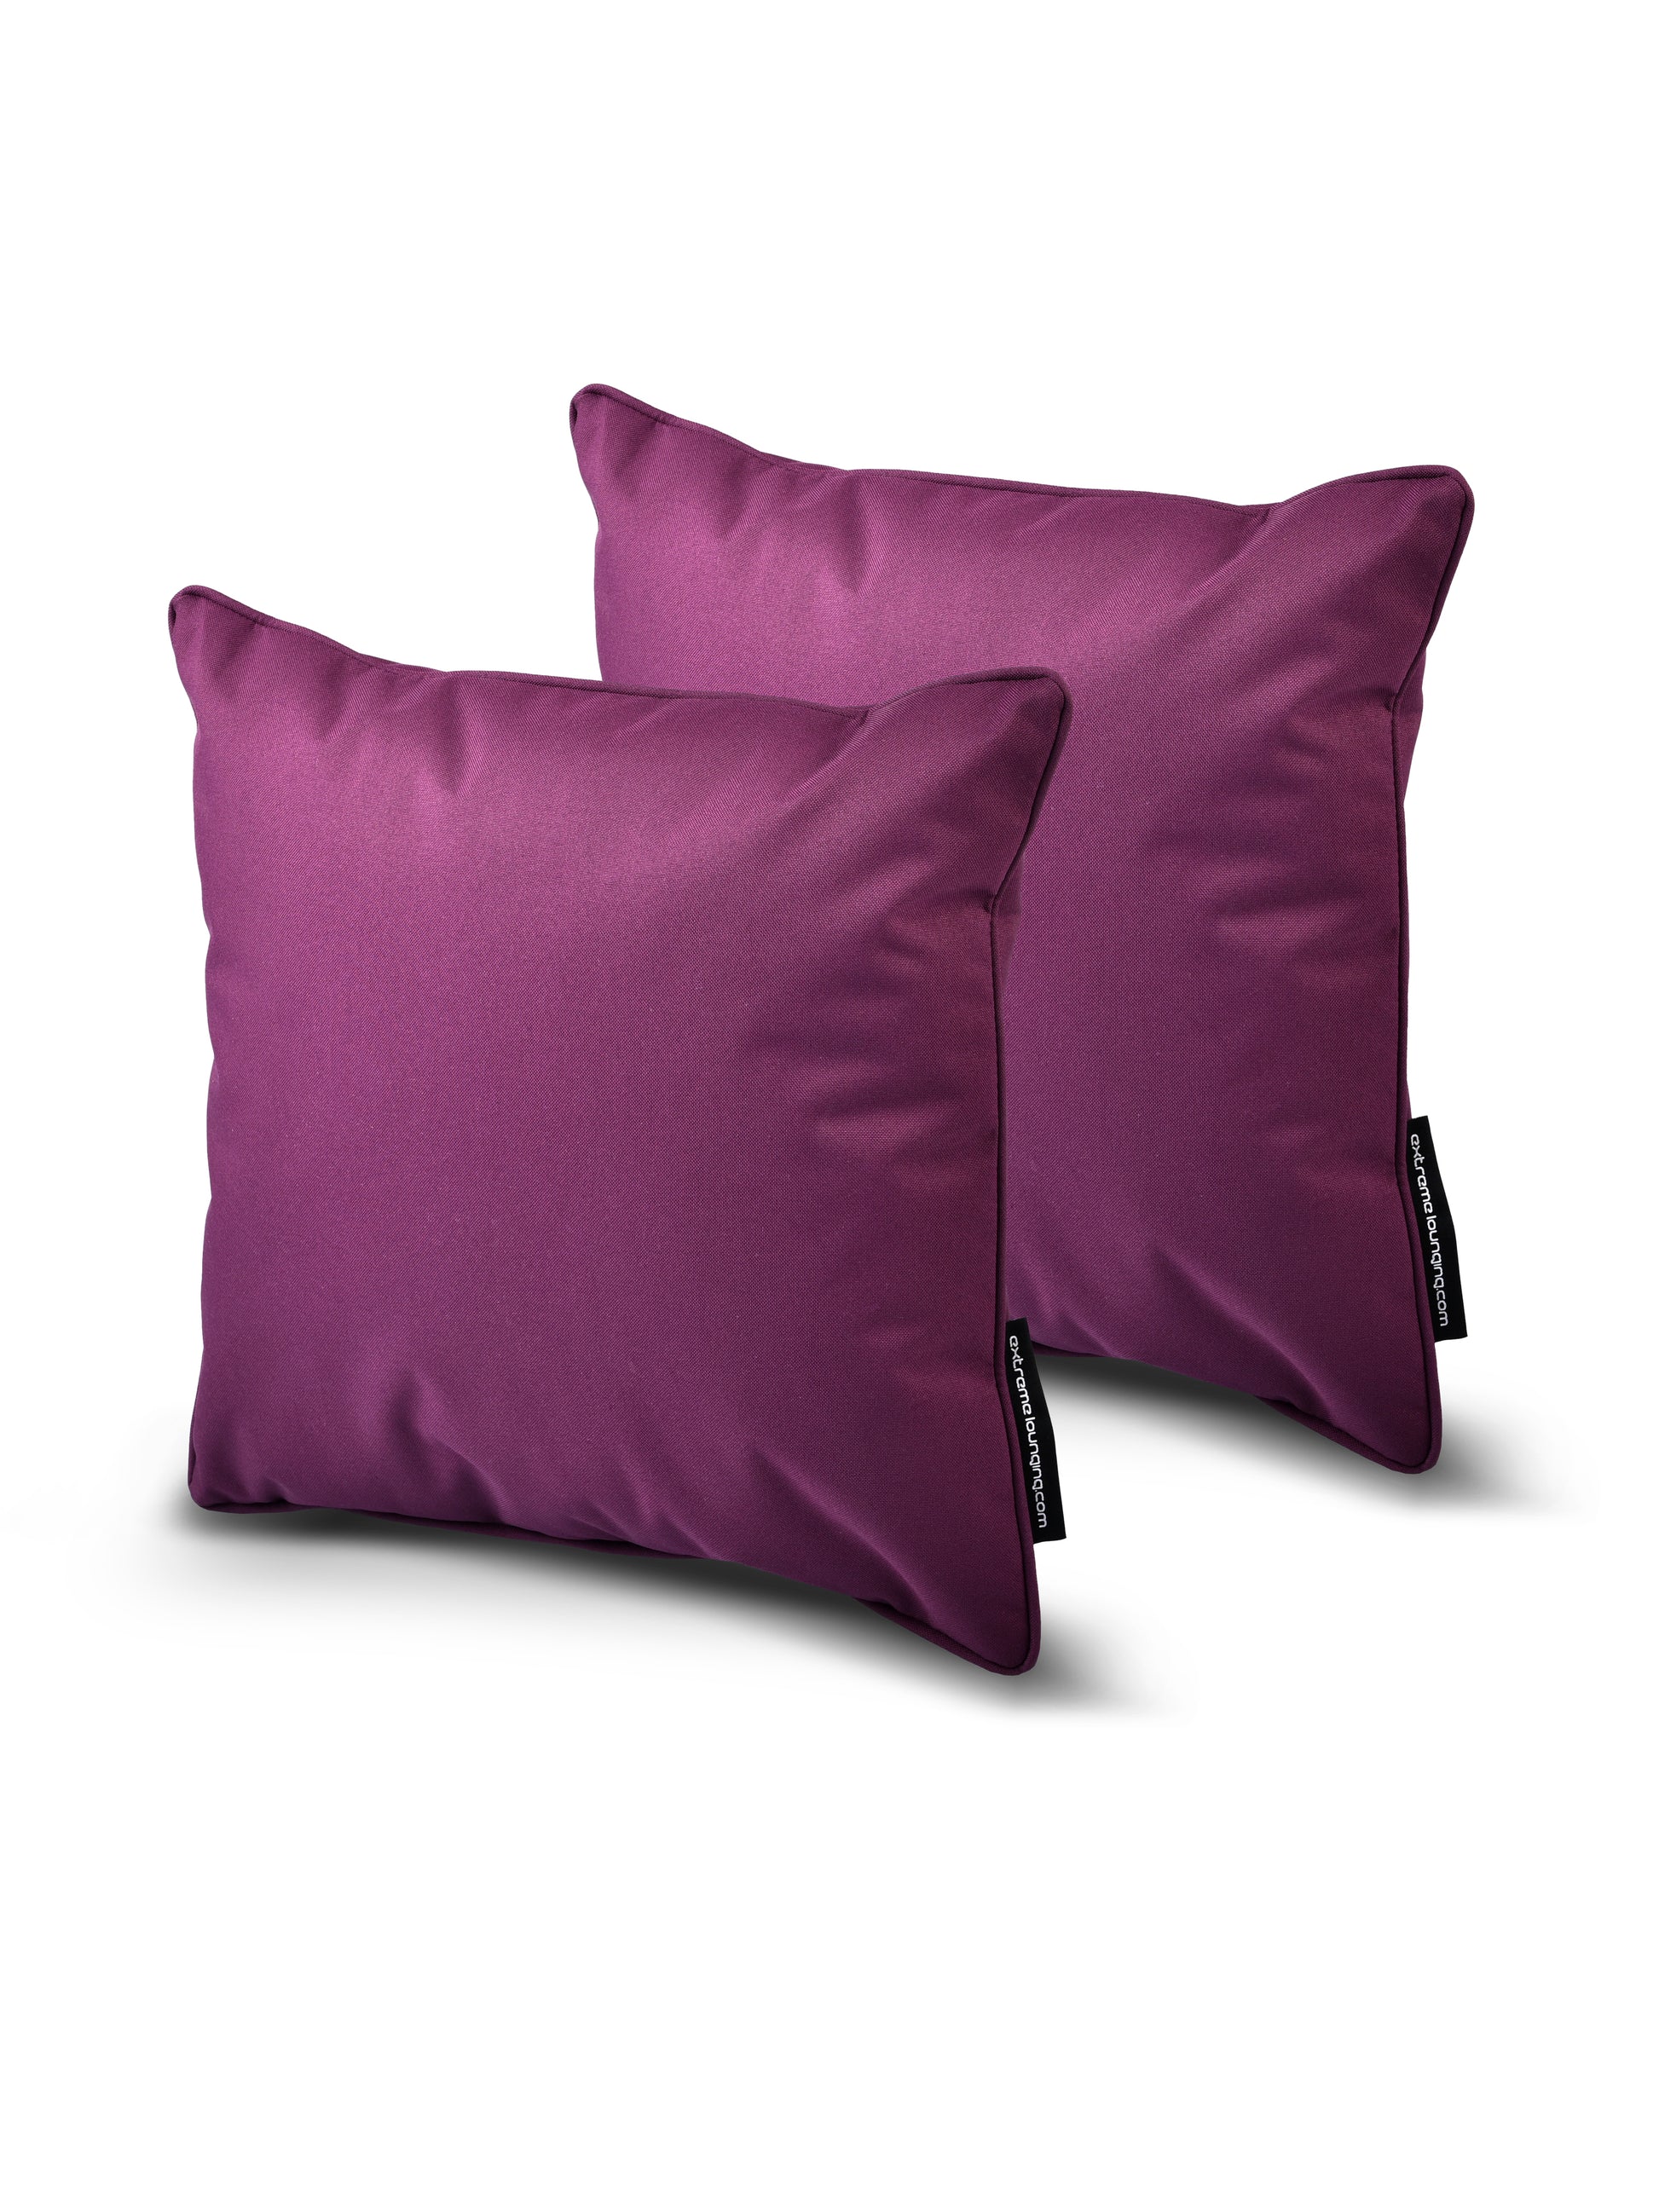 Two vibrant purple square pillows from the B Cushion Twin Pack Brights Collection by Brisks are placed against a white background. Each pillow, made from breathable polyester, has a smooth texture with a tag on the side that features text. The UV-resistant pillows look soft and plush, perfect for use on a sofa or bed.